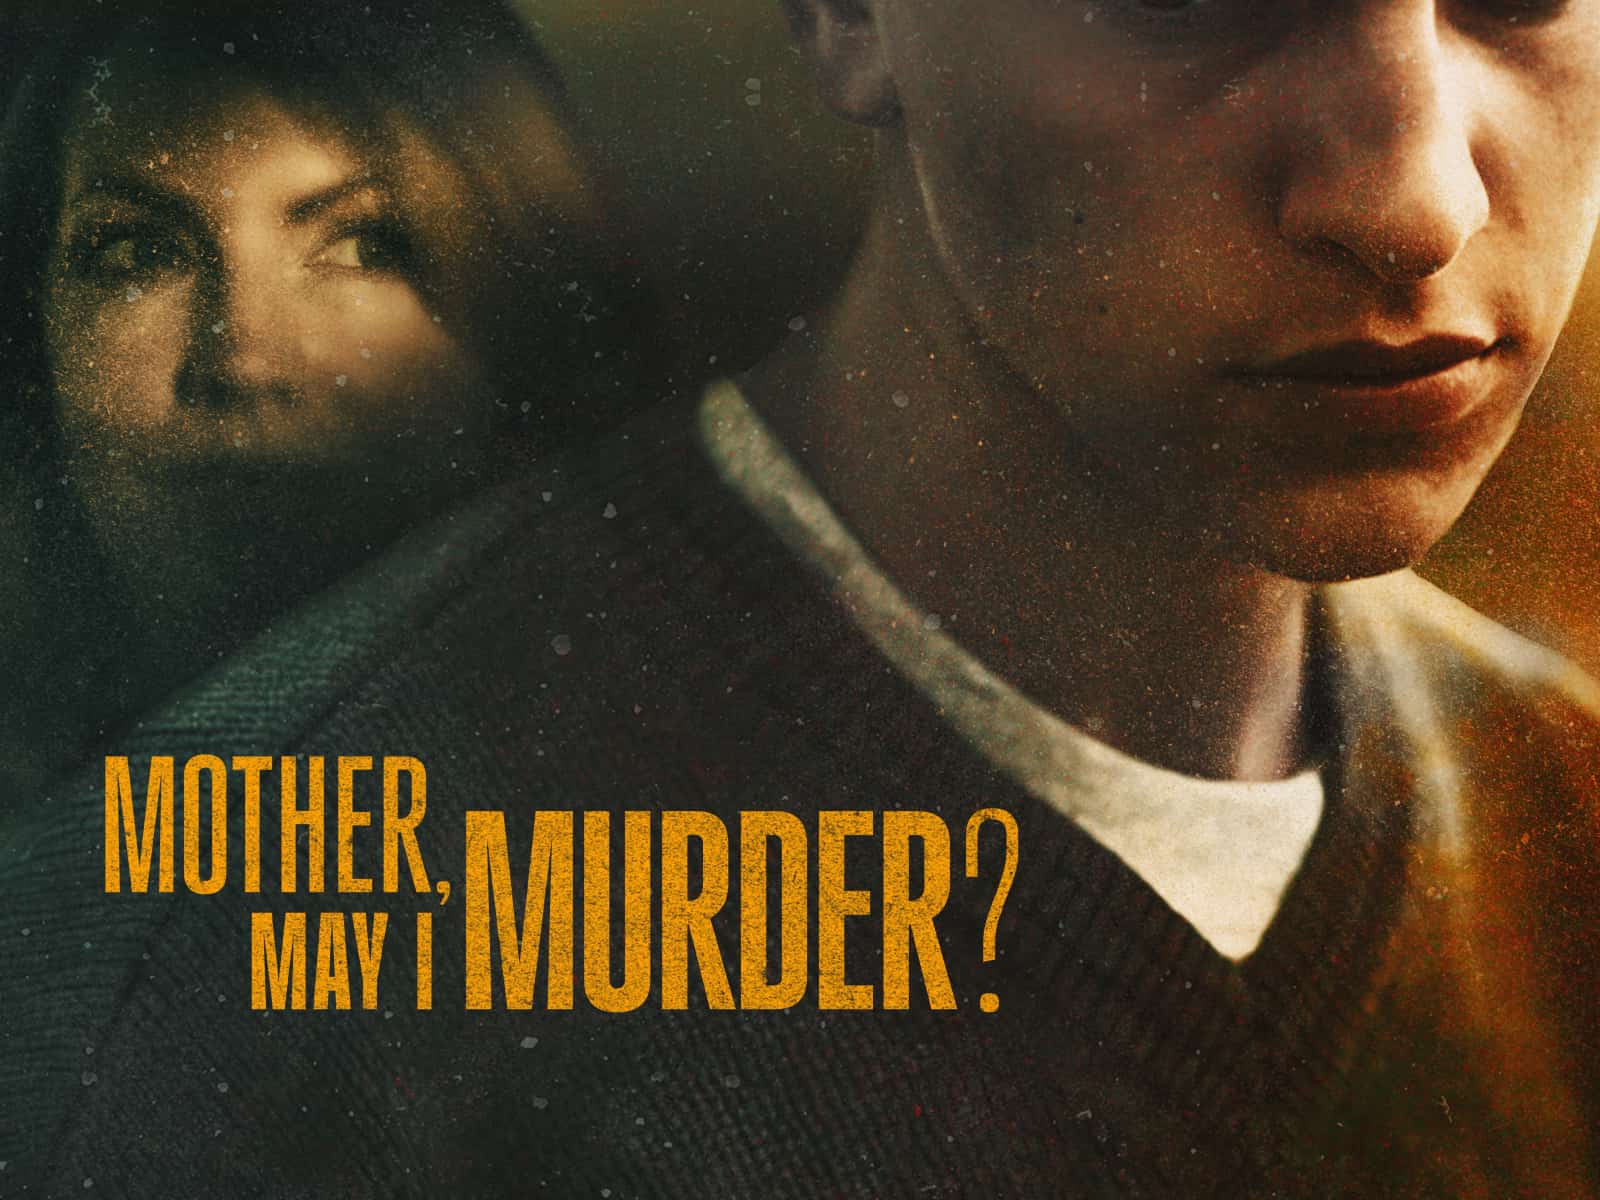 How to Watch Mother, May I Murder? Episodes Online? Streaming Guide